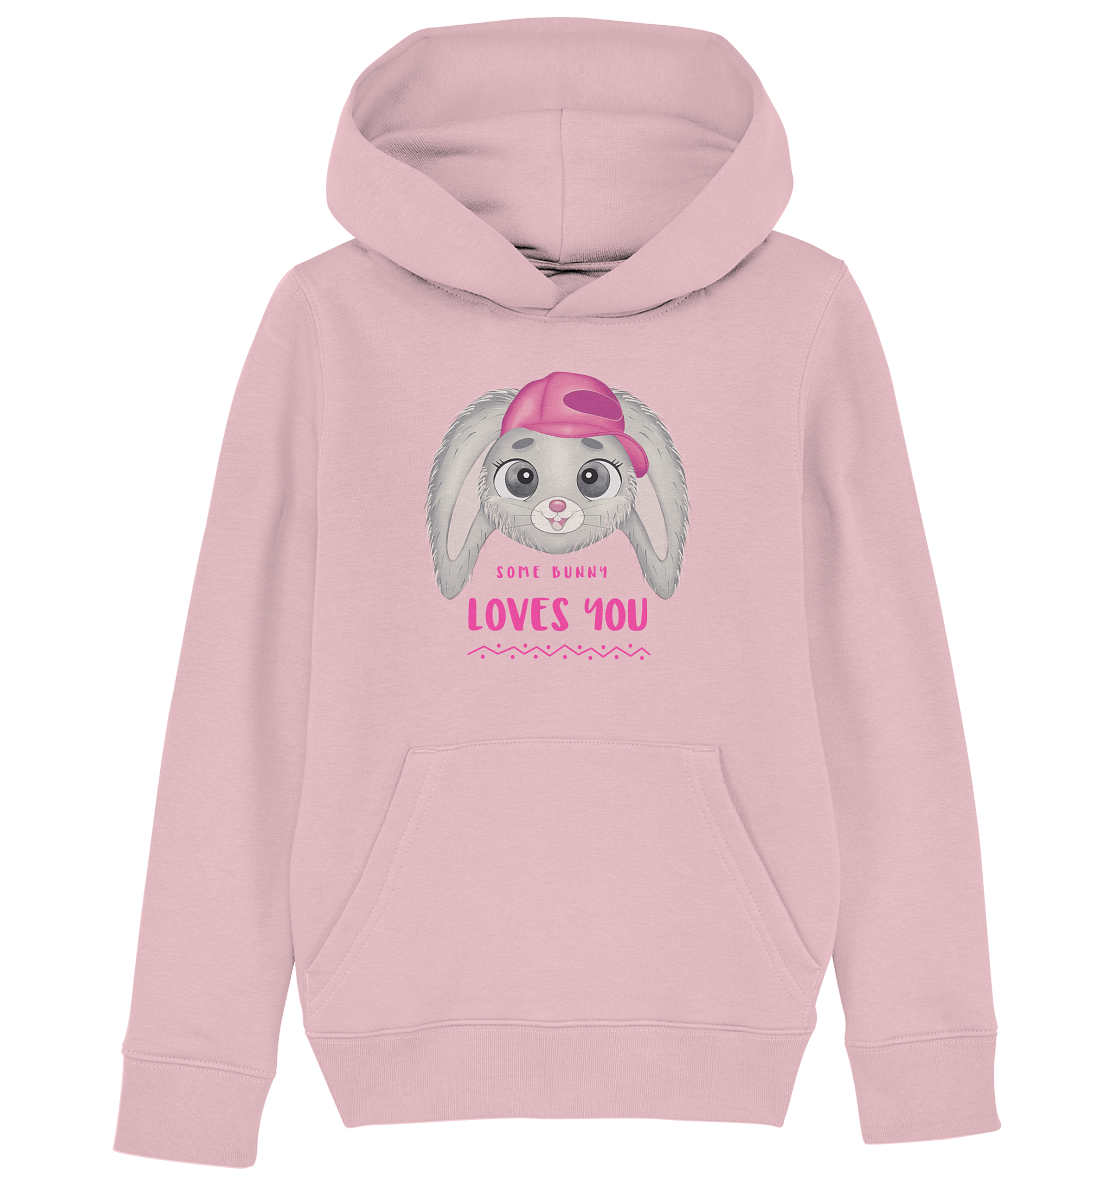 Hase Bunny Bunny Kapuzenpullover "Some Bunny loves you" Hase Muster Pulli in rosa